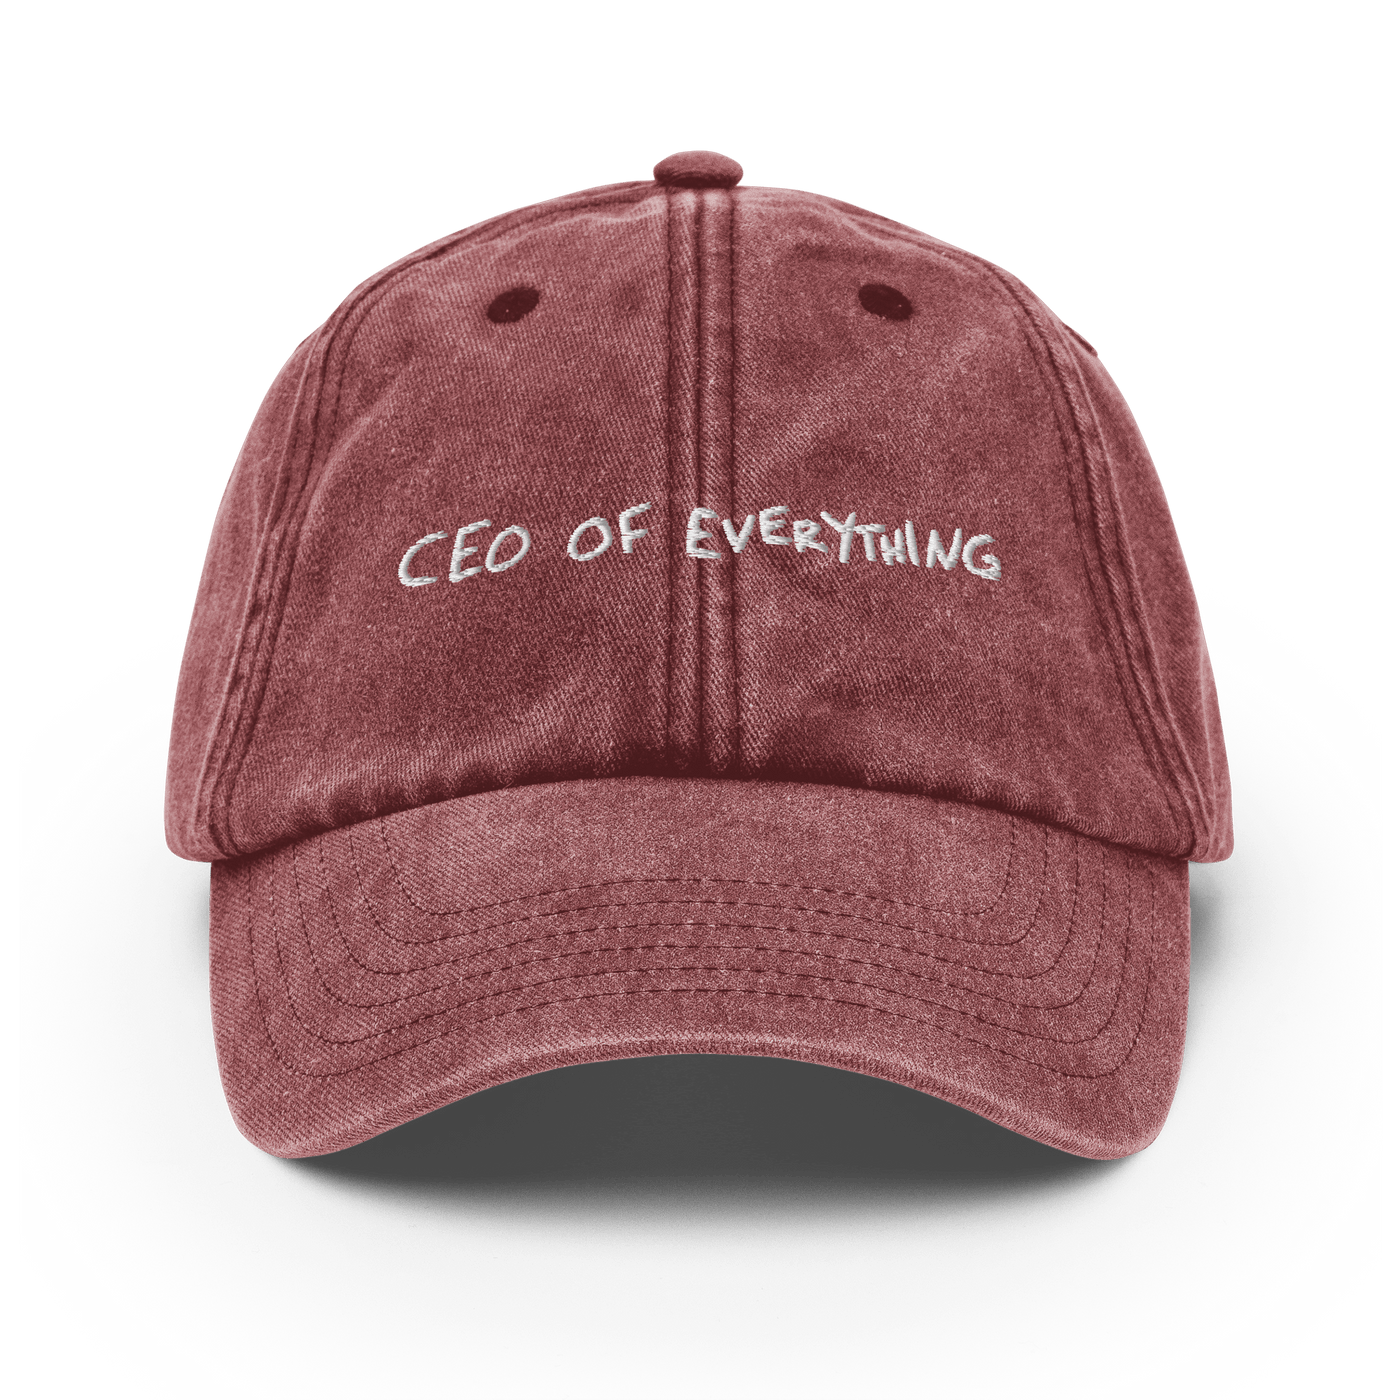 CEO of everything Vintage Hat - Vintage Denim - - Just Another Cap Store